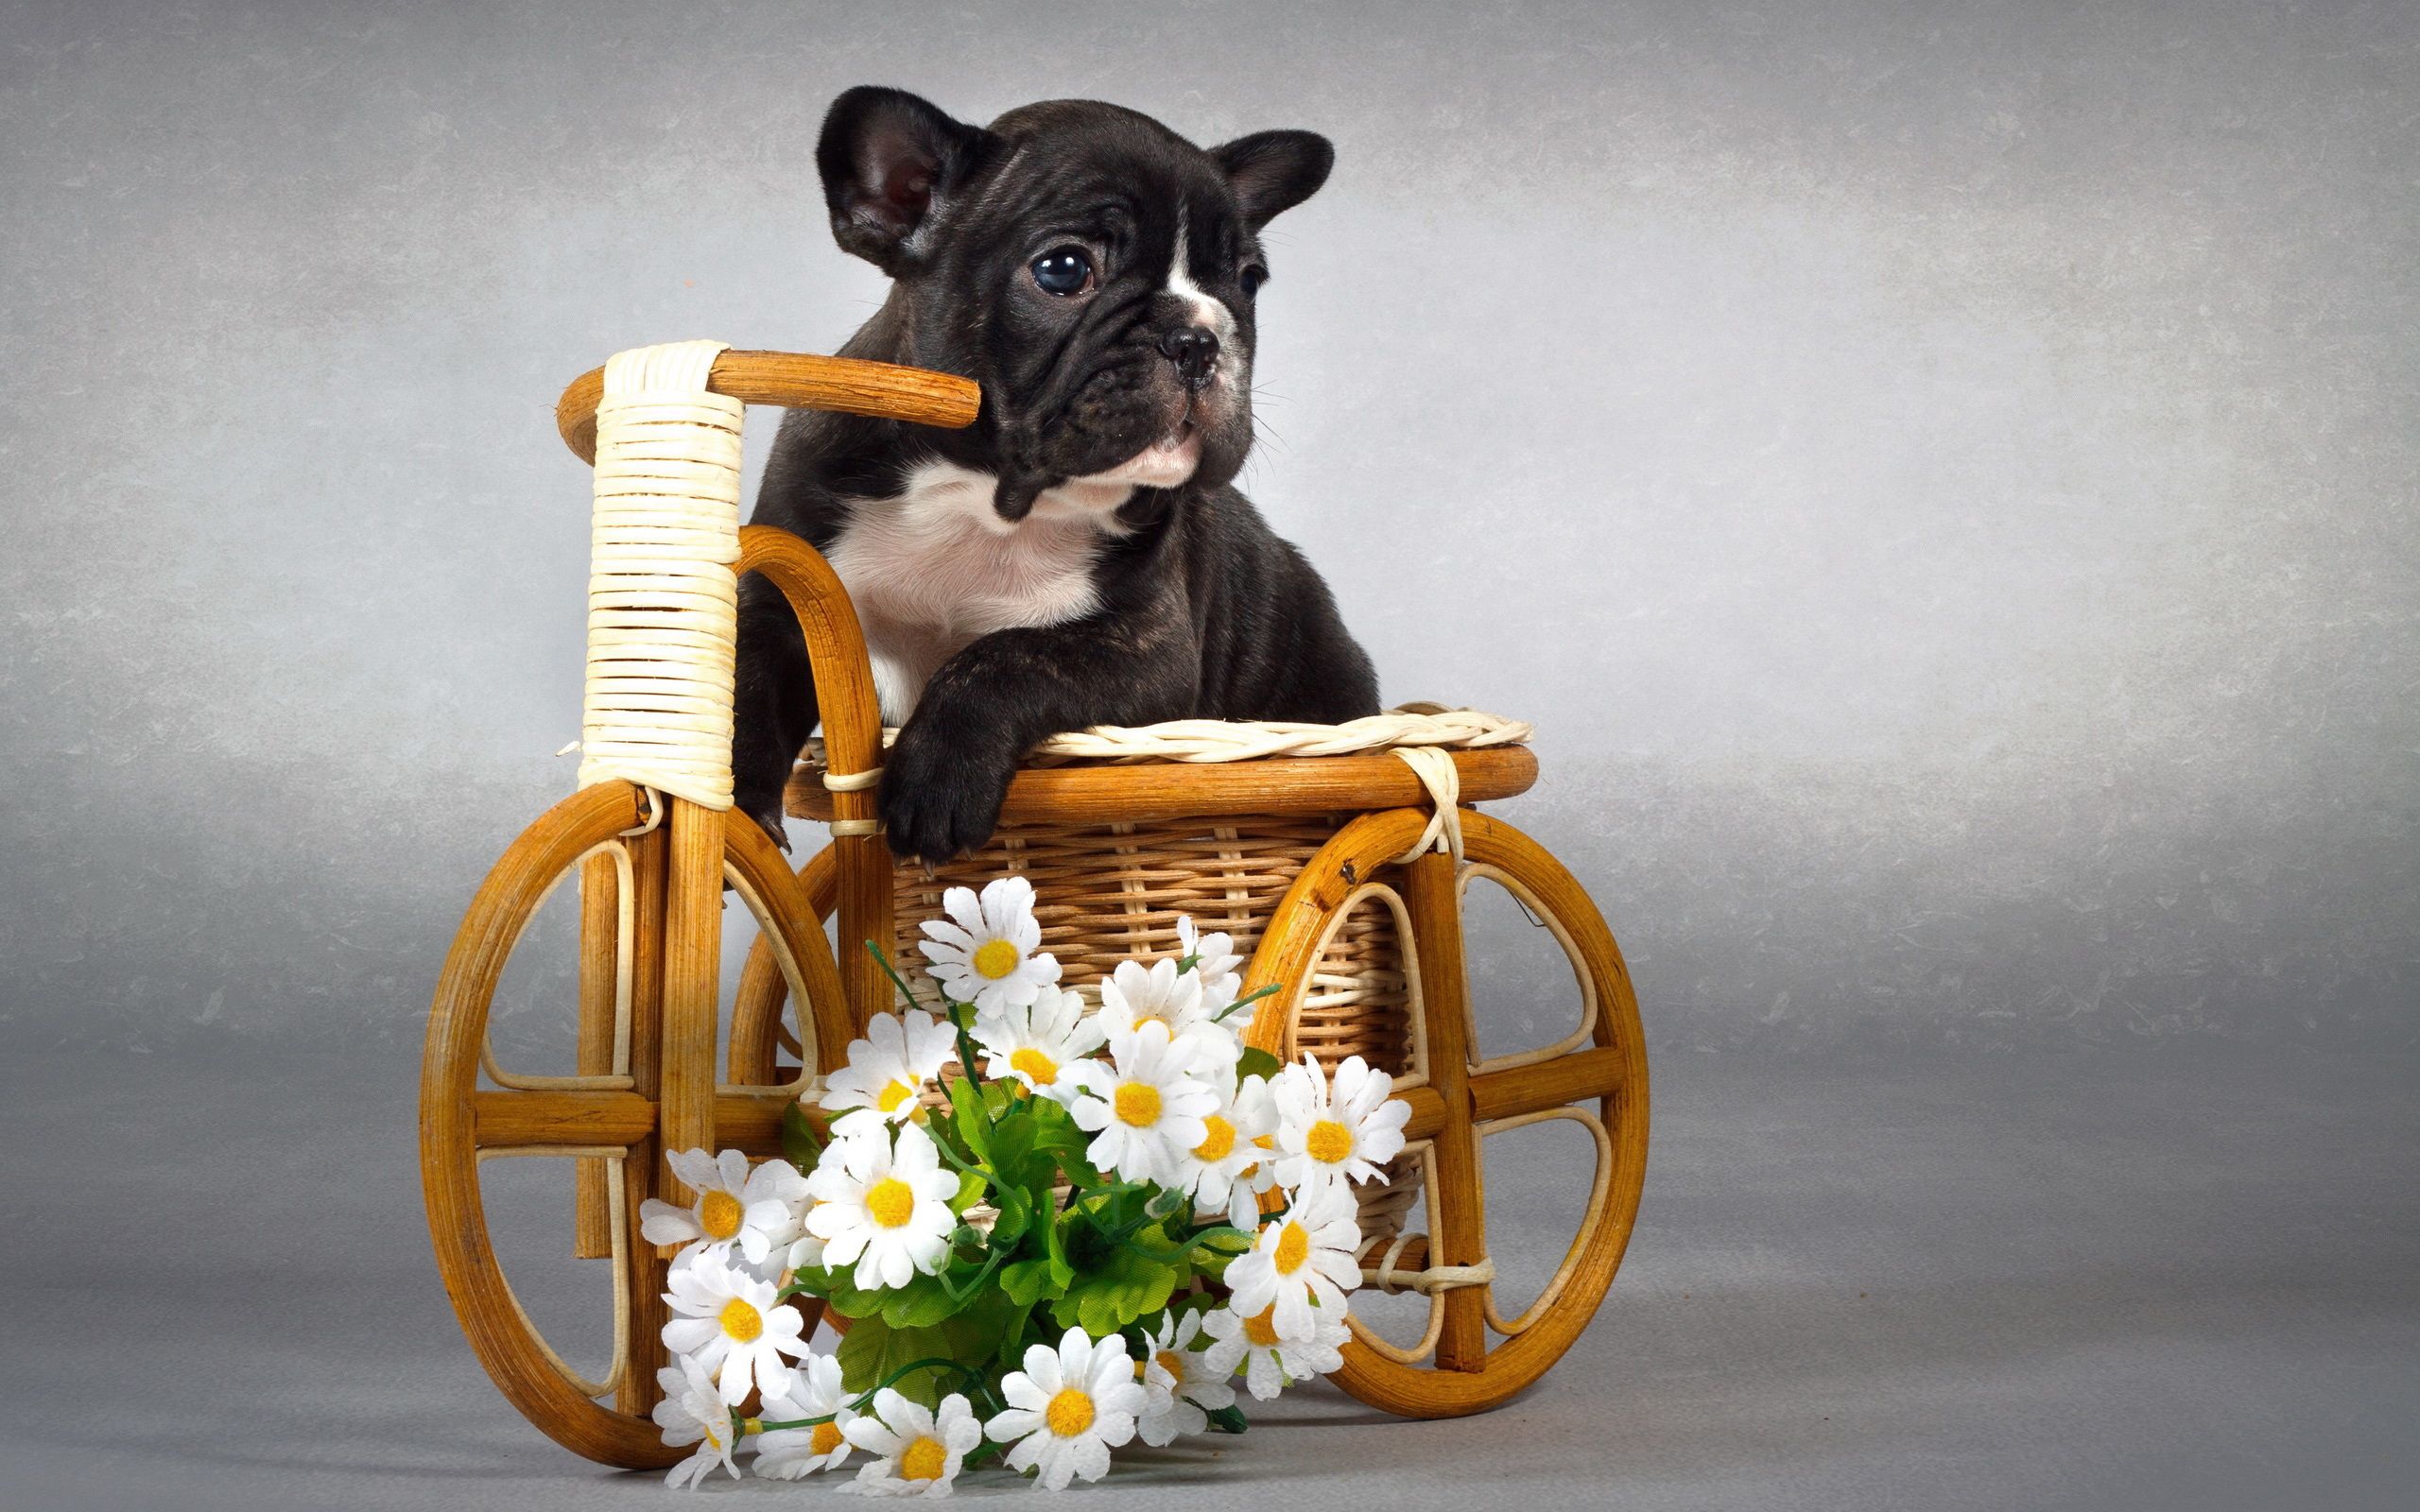 Cute Puppy With Flowers Wallpaper Quality Image And Transparent PNG Free Clipart